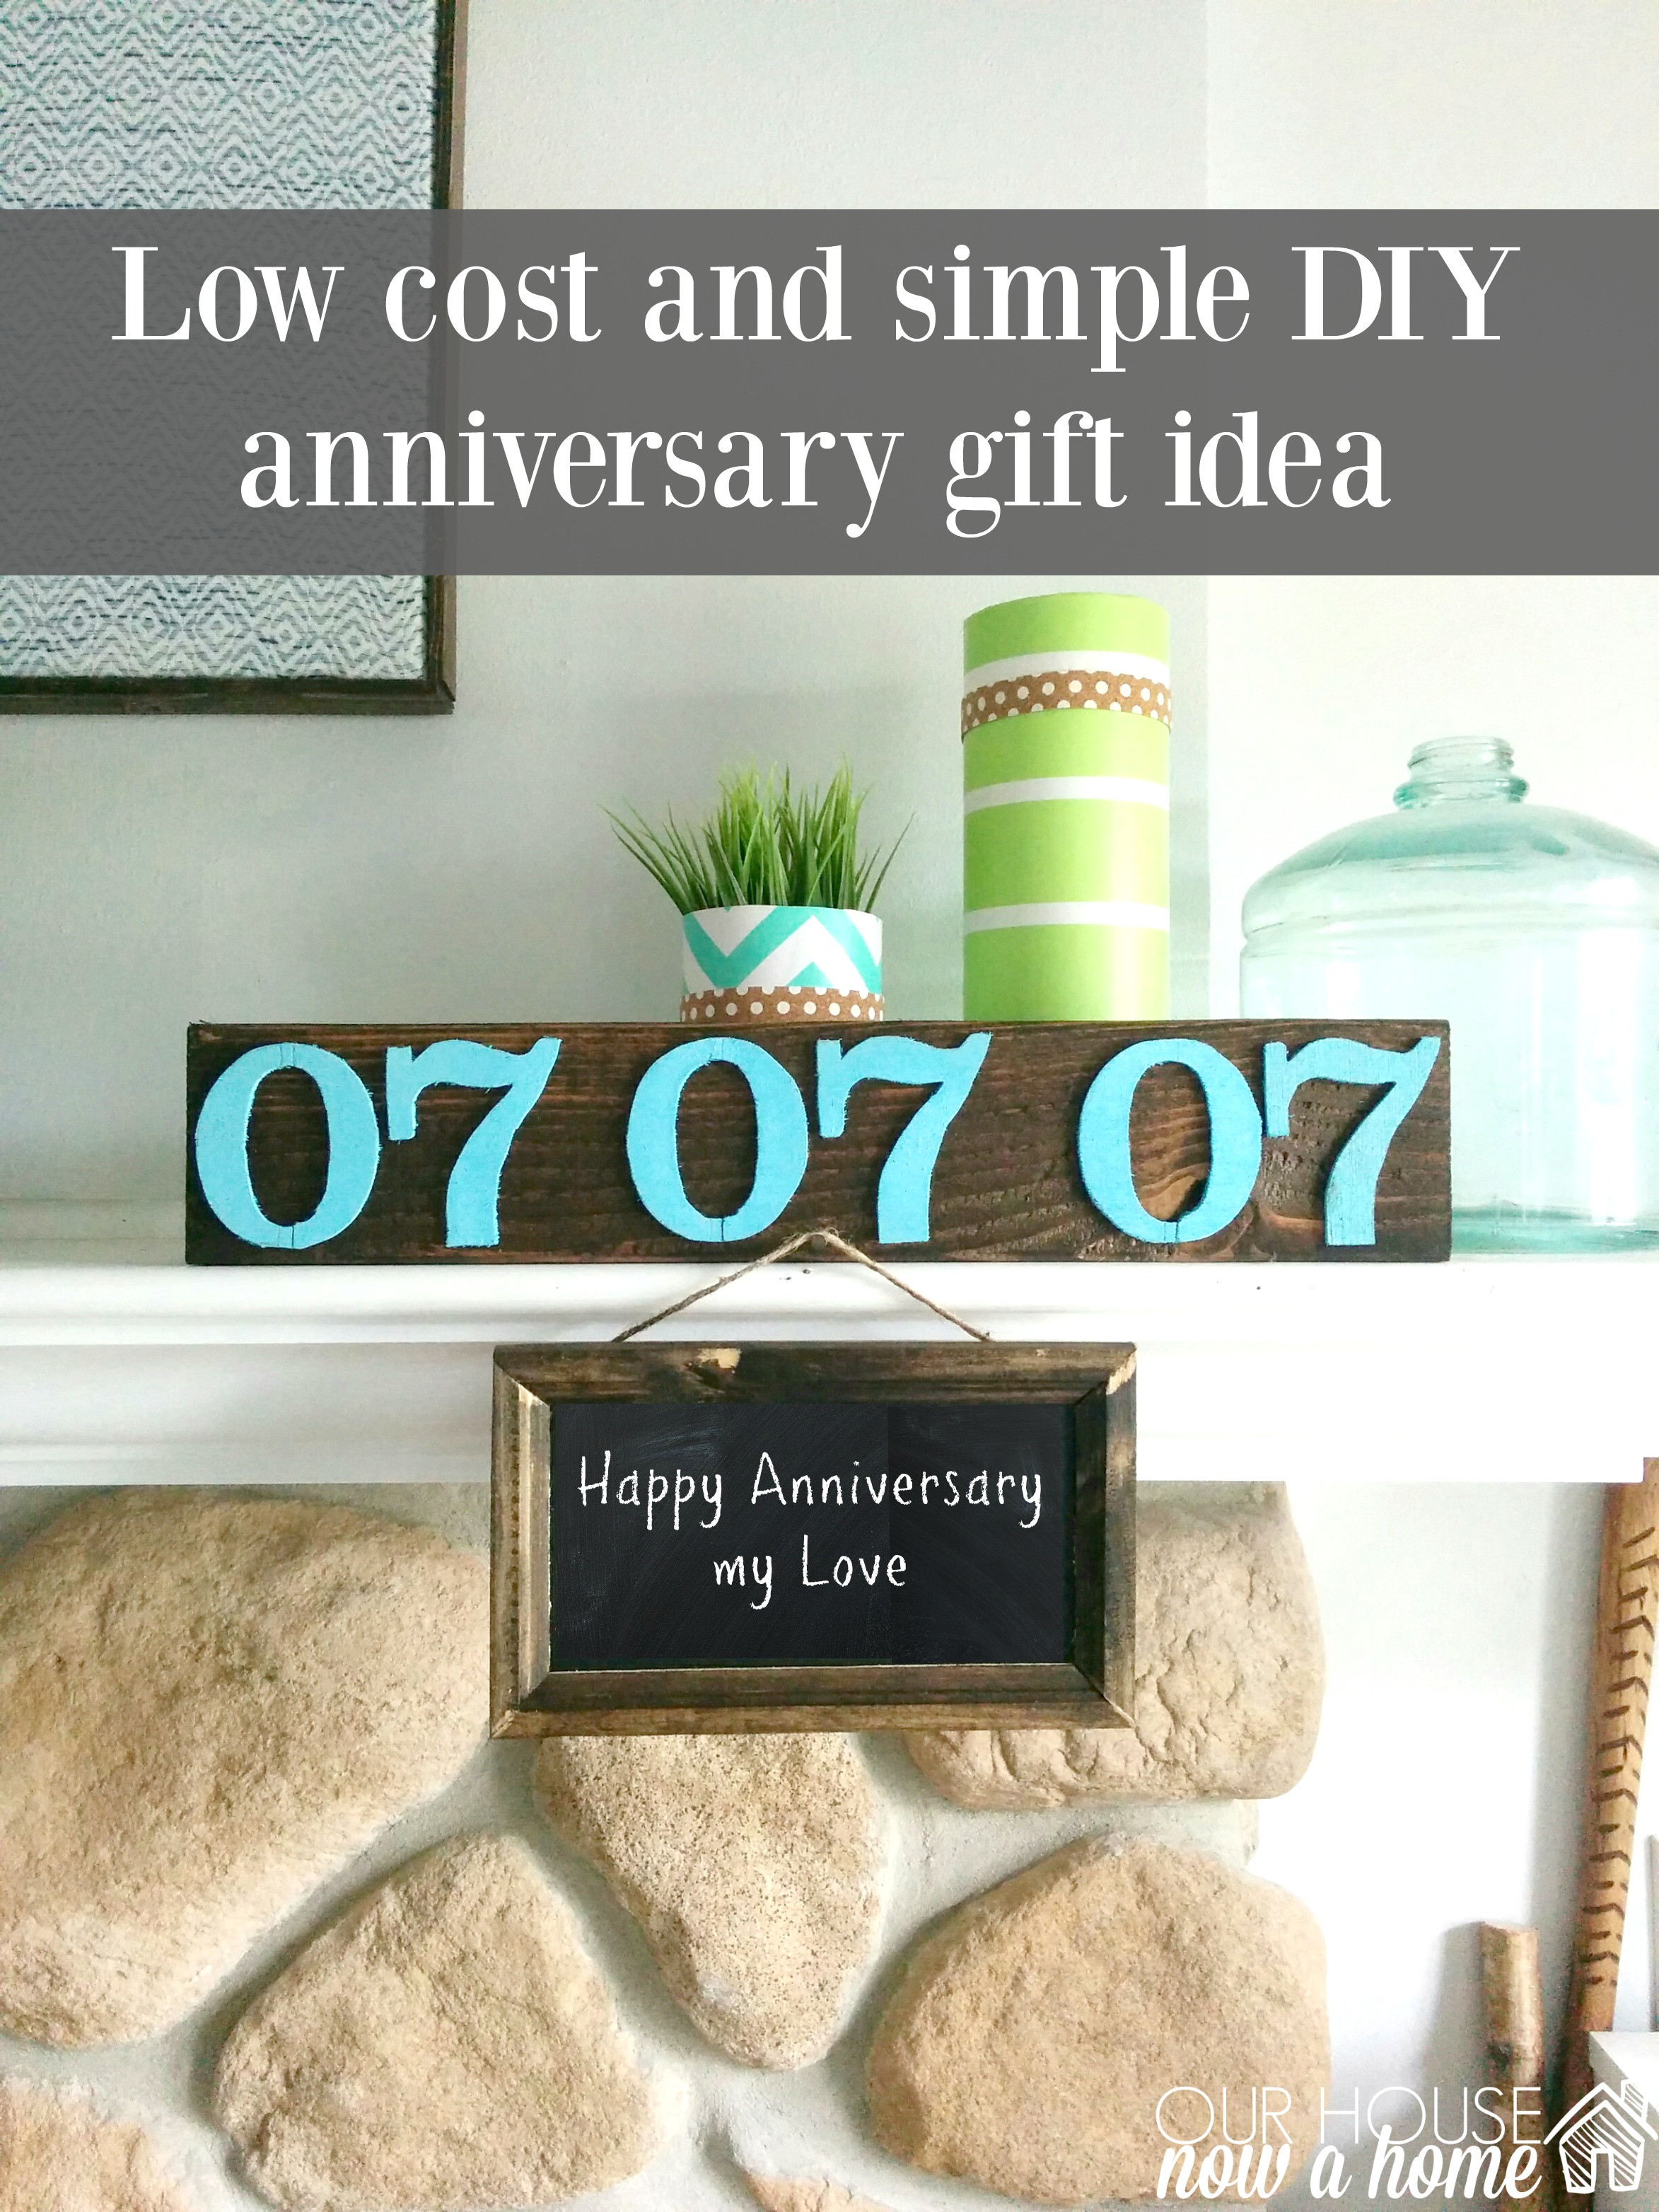 Gift Ideas For Anniversary
 DIY and low cost anniversary t ideas • Our House Now a Home